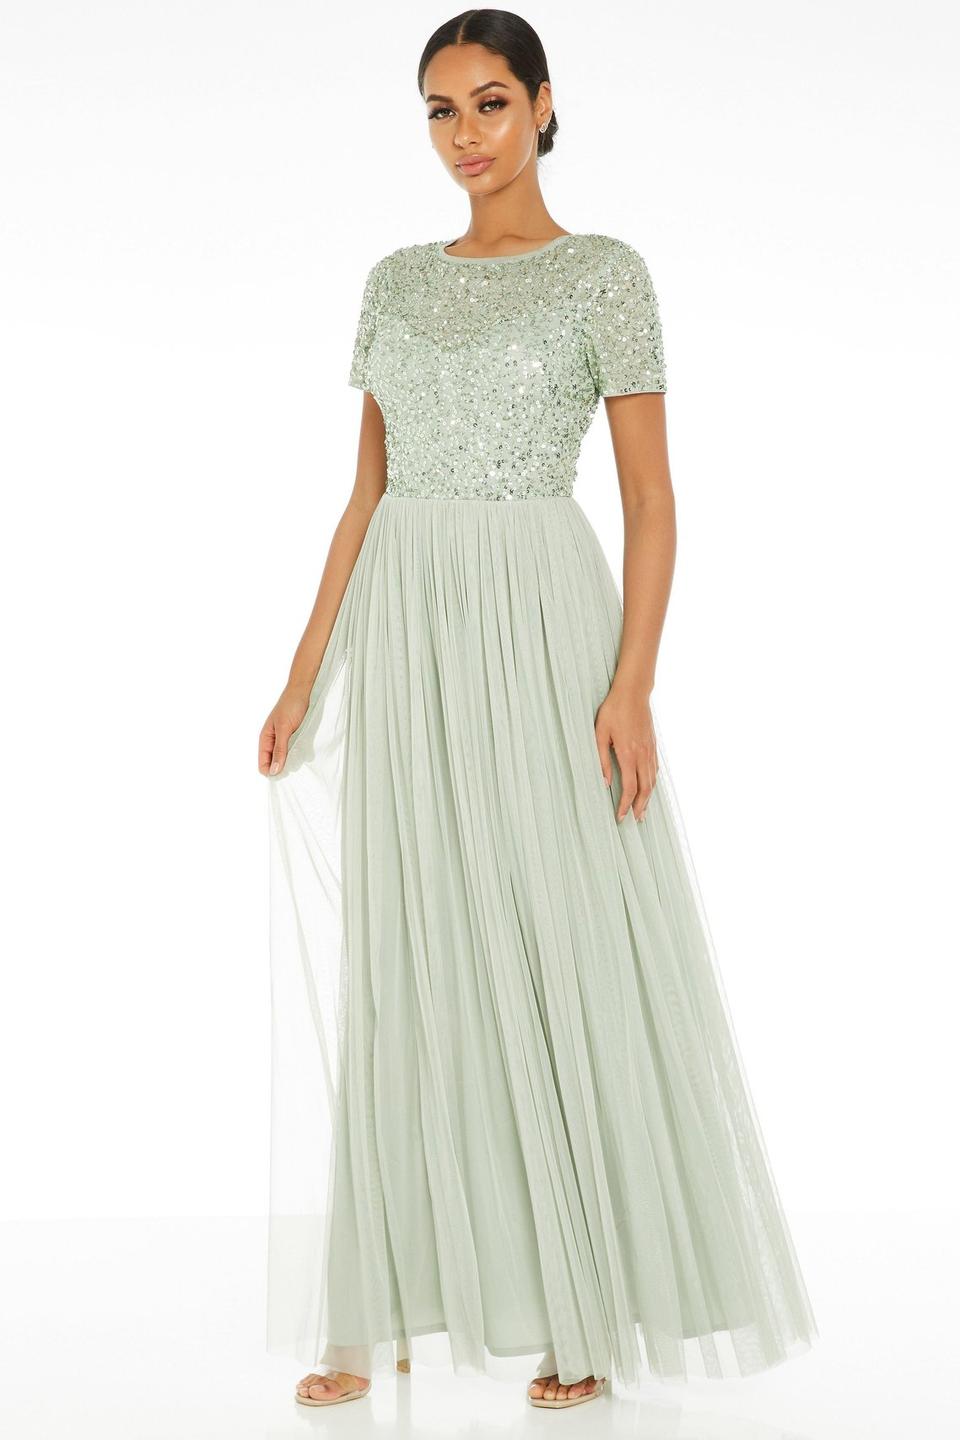 The Best Places to Buy Bridesmaid Dresses Online - hitched.co.uk ...